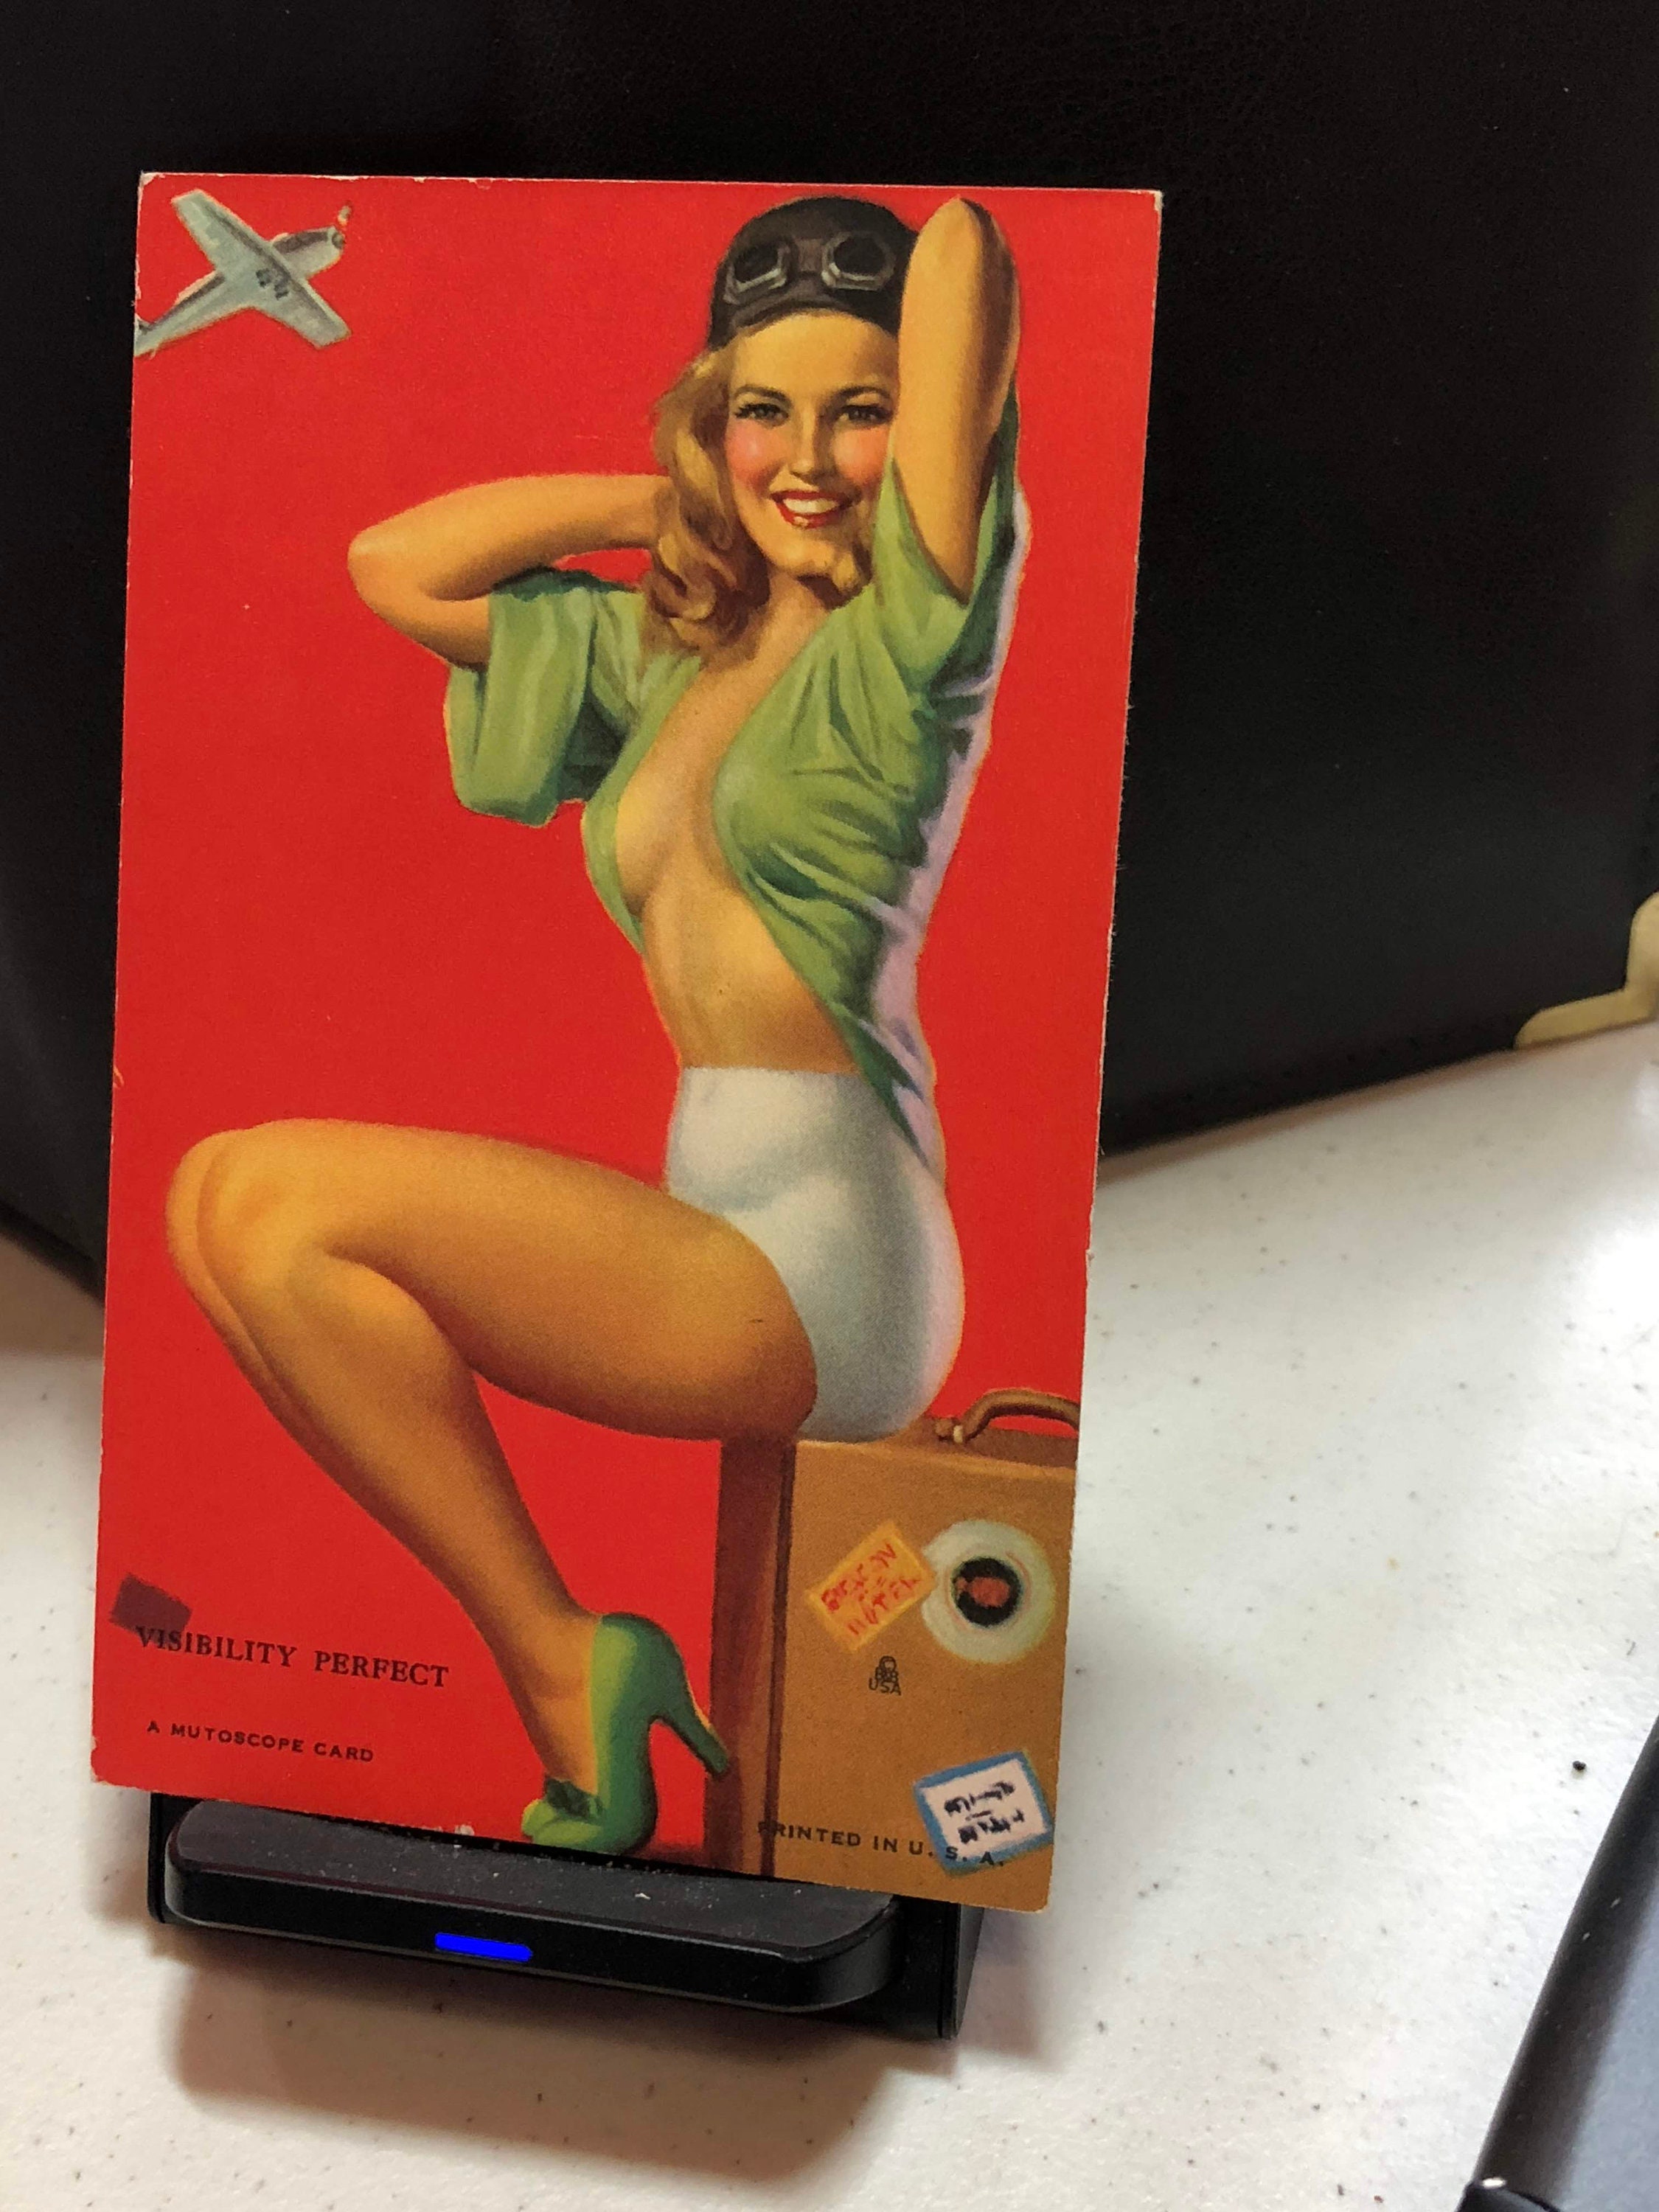 1940s Mutoscope Vintage Risque Pin Up Postcard Pinup Glamour Etsy